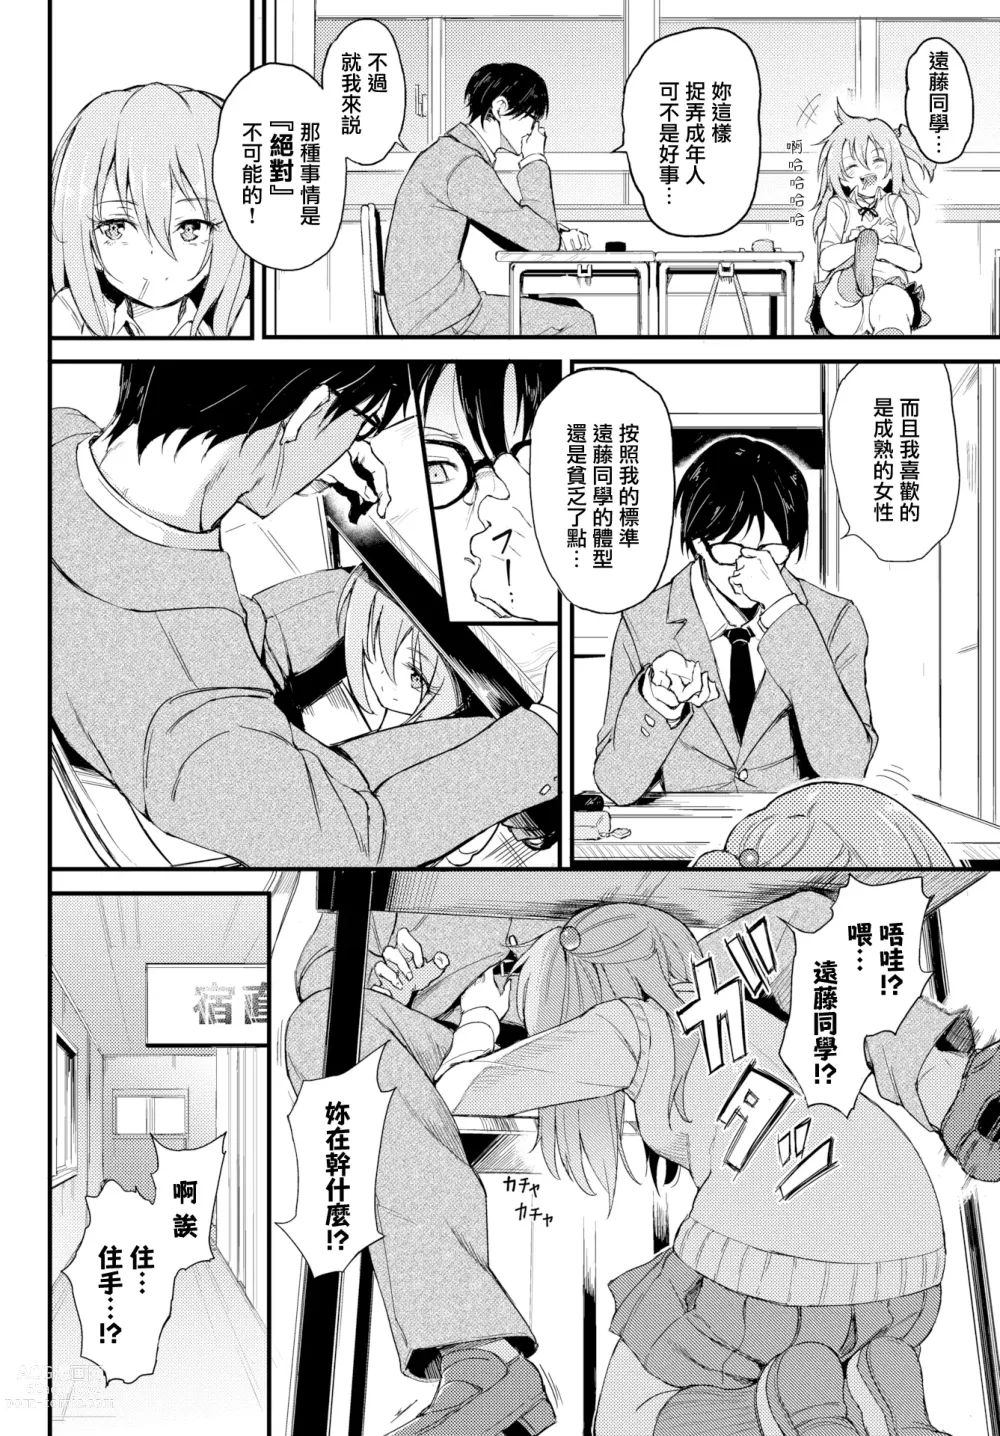 Page 4 of doujinshi Lovely Aina-chan ♥~♥♥♥